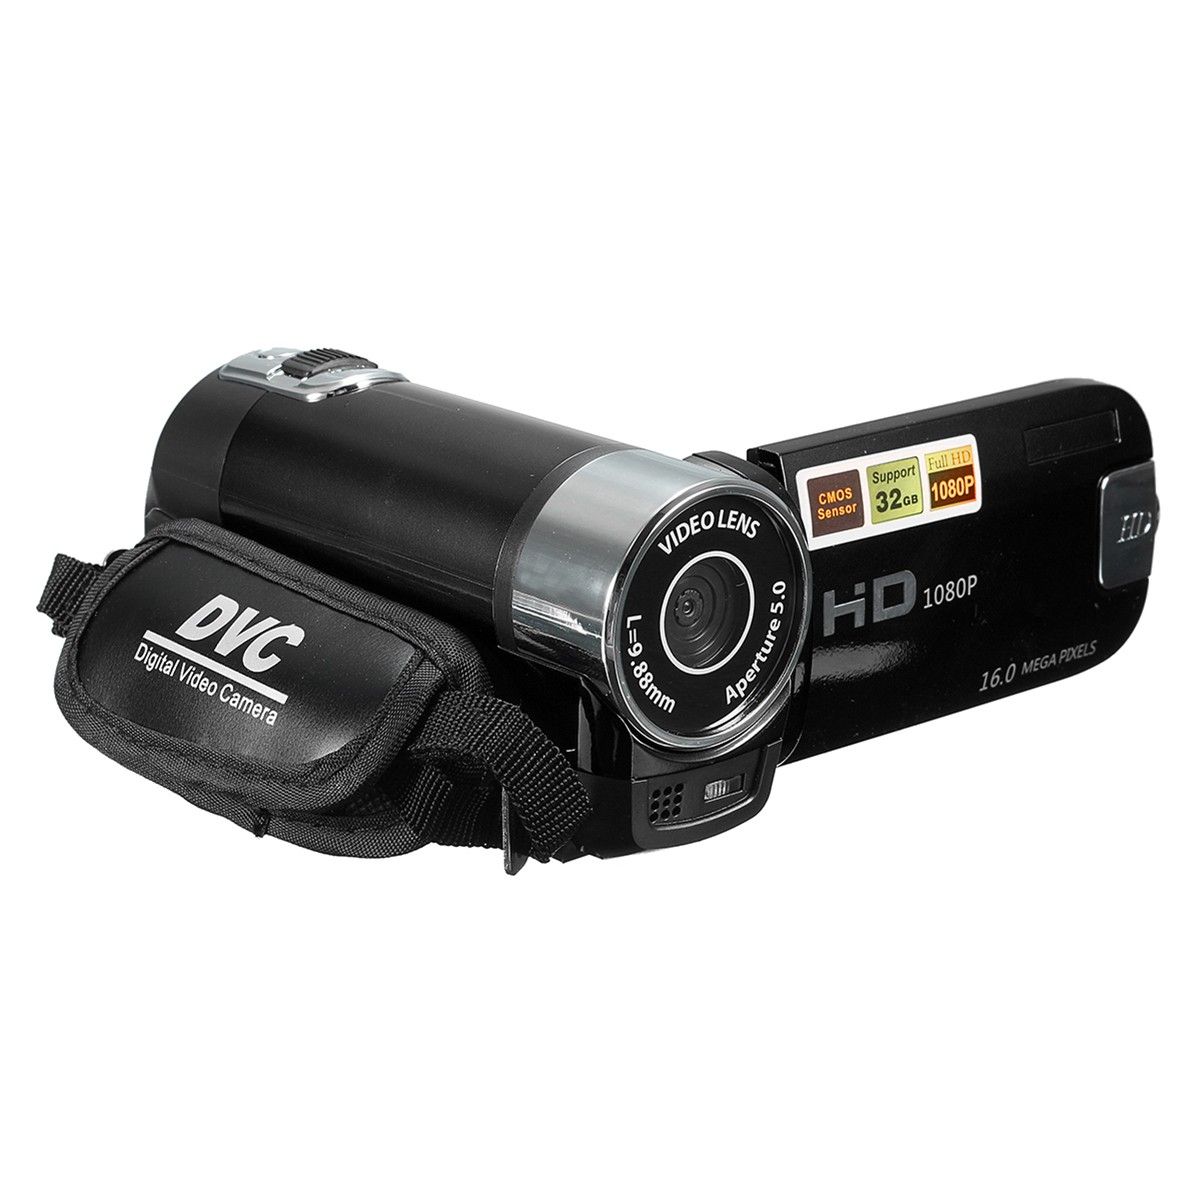 16MP-1080P-HD-Digital-Video-Camcorder-DV-Camera-with-27-Inch-LCD-Screen-1639909